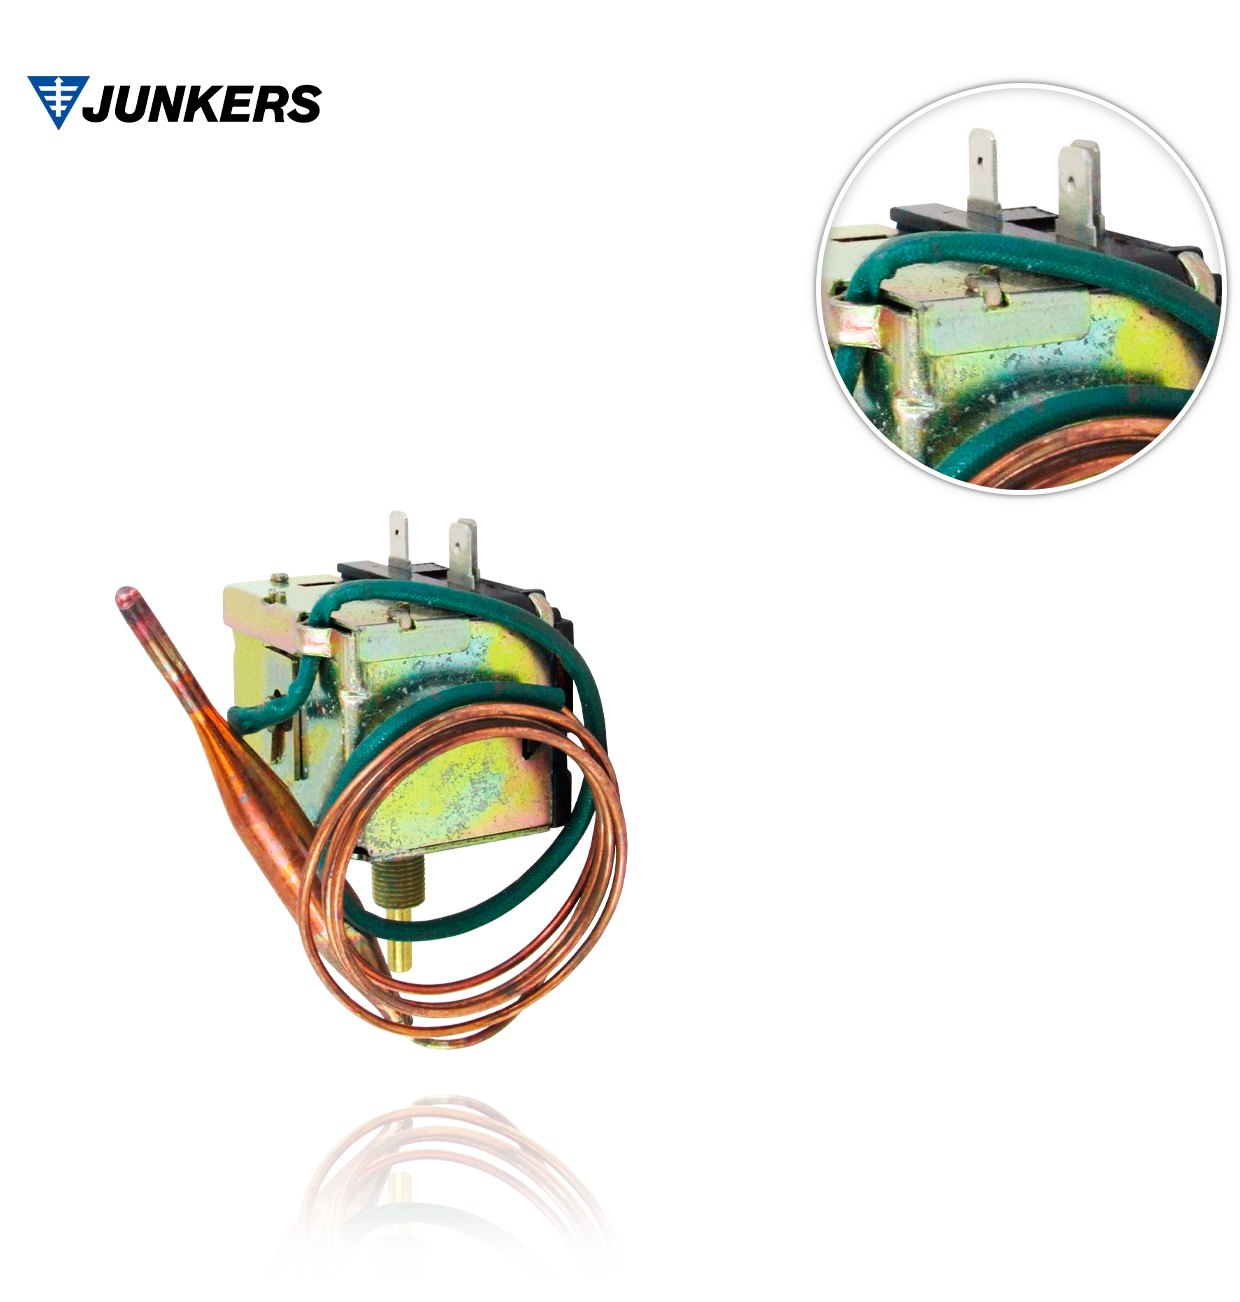 JUNKERS 8716142335 GAS OIL MAIN THERMOSTAT